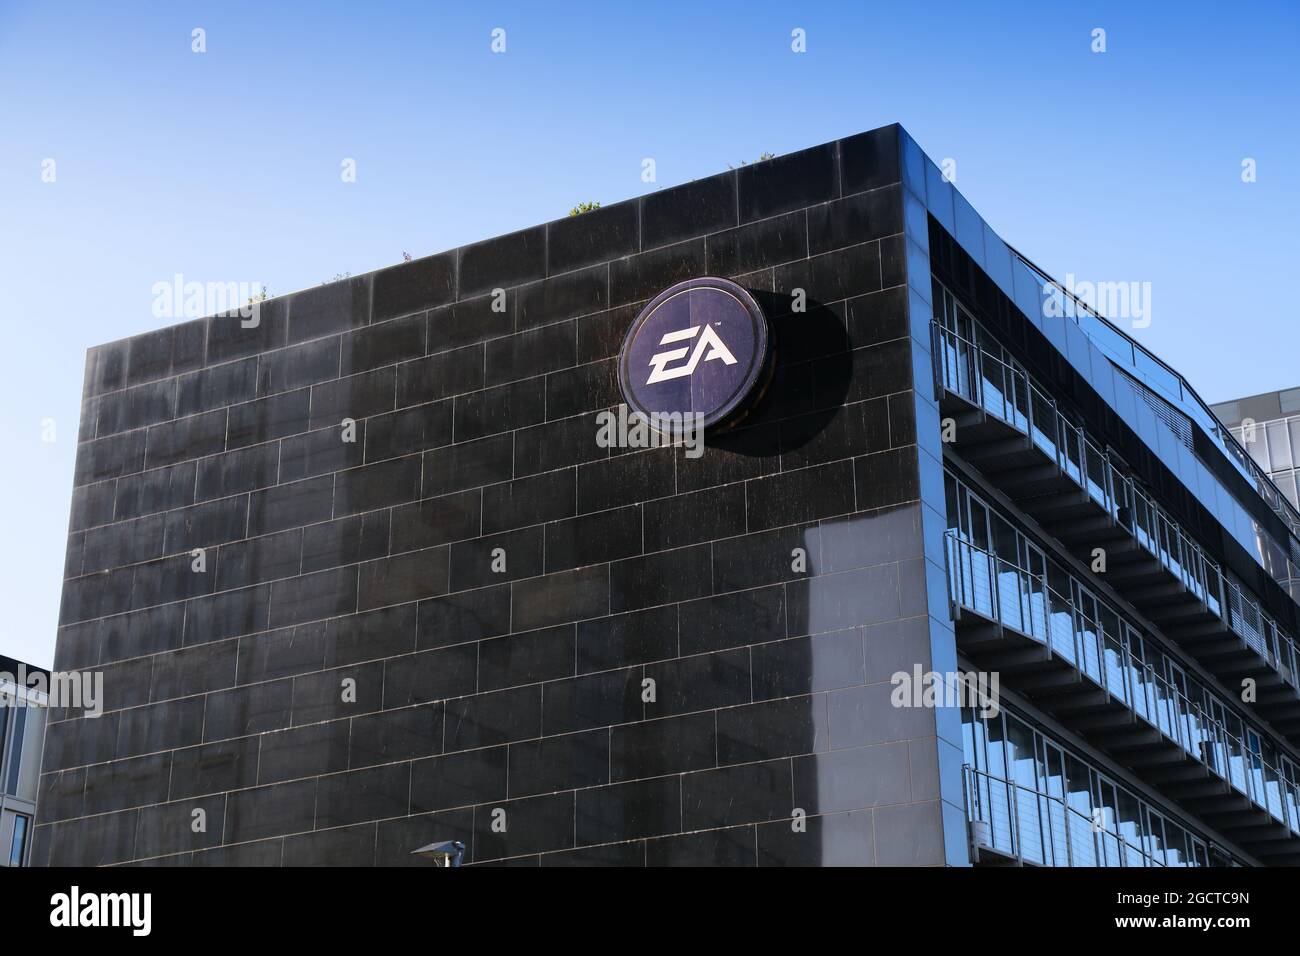 COLOGNE, GERMANY - SEPTEMBER 21, 2020: Electronic Arts video game company office in Cologne city, Germany. Stock Photo